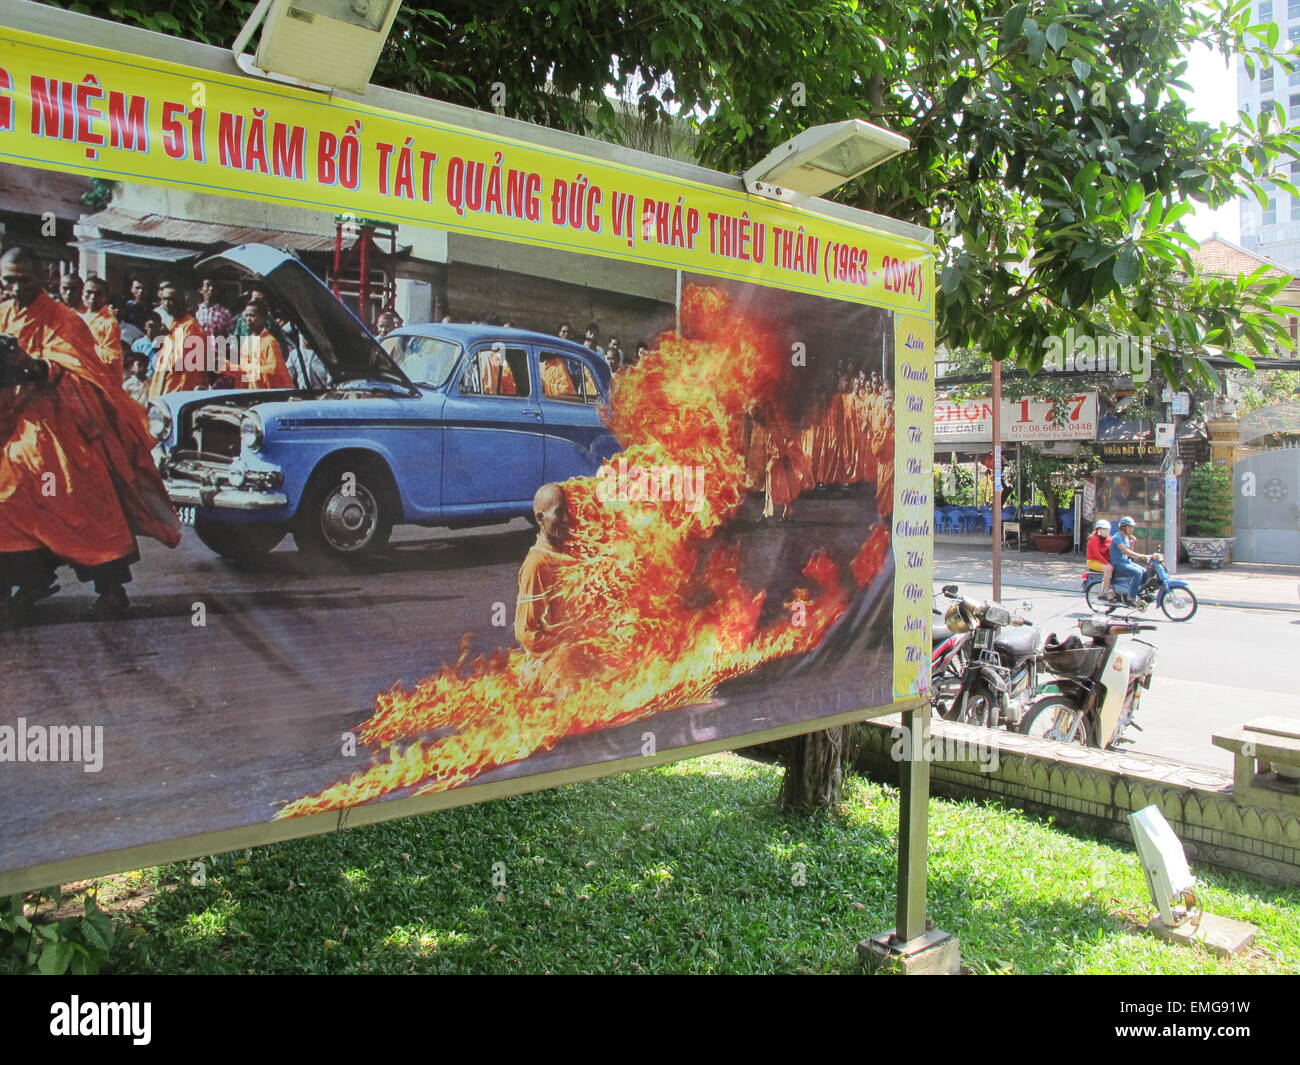 A poster in former Saigon (now named Ho Chi Minh City) commemorates Buddhist monk Thich Quang Duc, who publicly burned himself to death on 11 June 1963 to protest against the South Vietnamese government supported by the US, photographed on 15 February 2015 in Ho Chi Minh City, Vietnam. By burning himself, he caused riots, which ultimately led to the collapse of the South Vietnamese regime. Photo: Christiane Oelrich/dpa Stock Photo